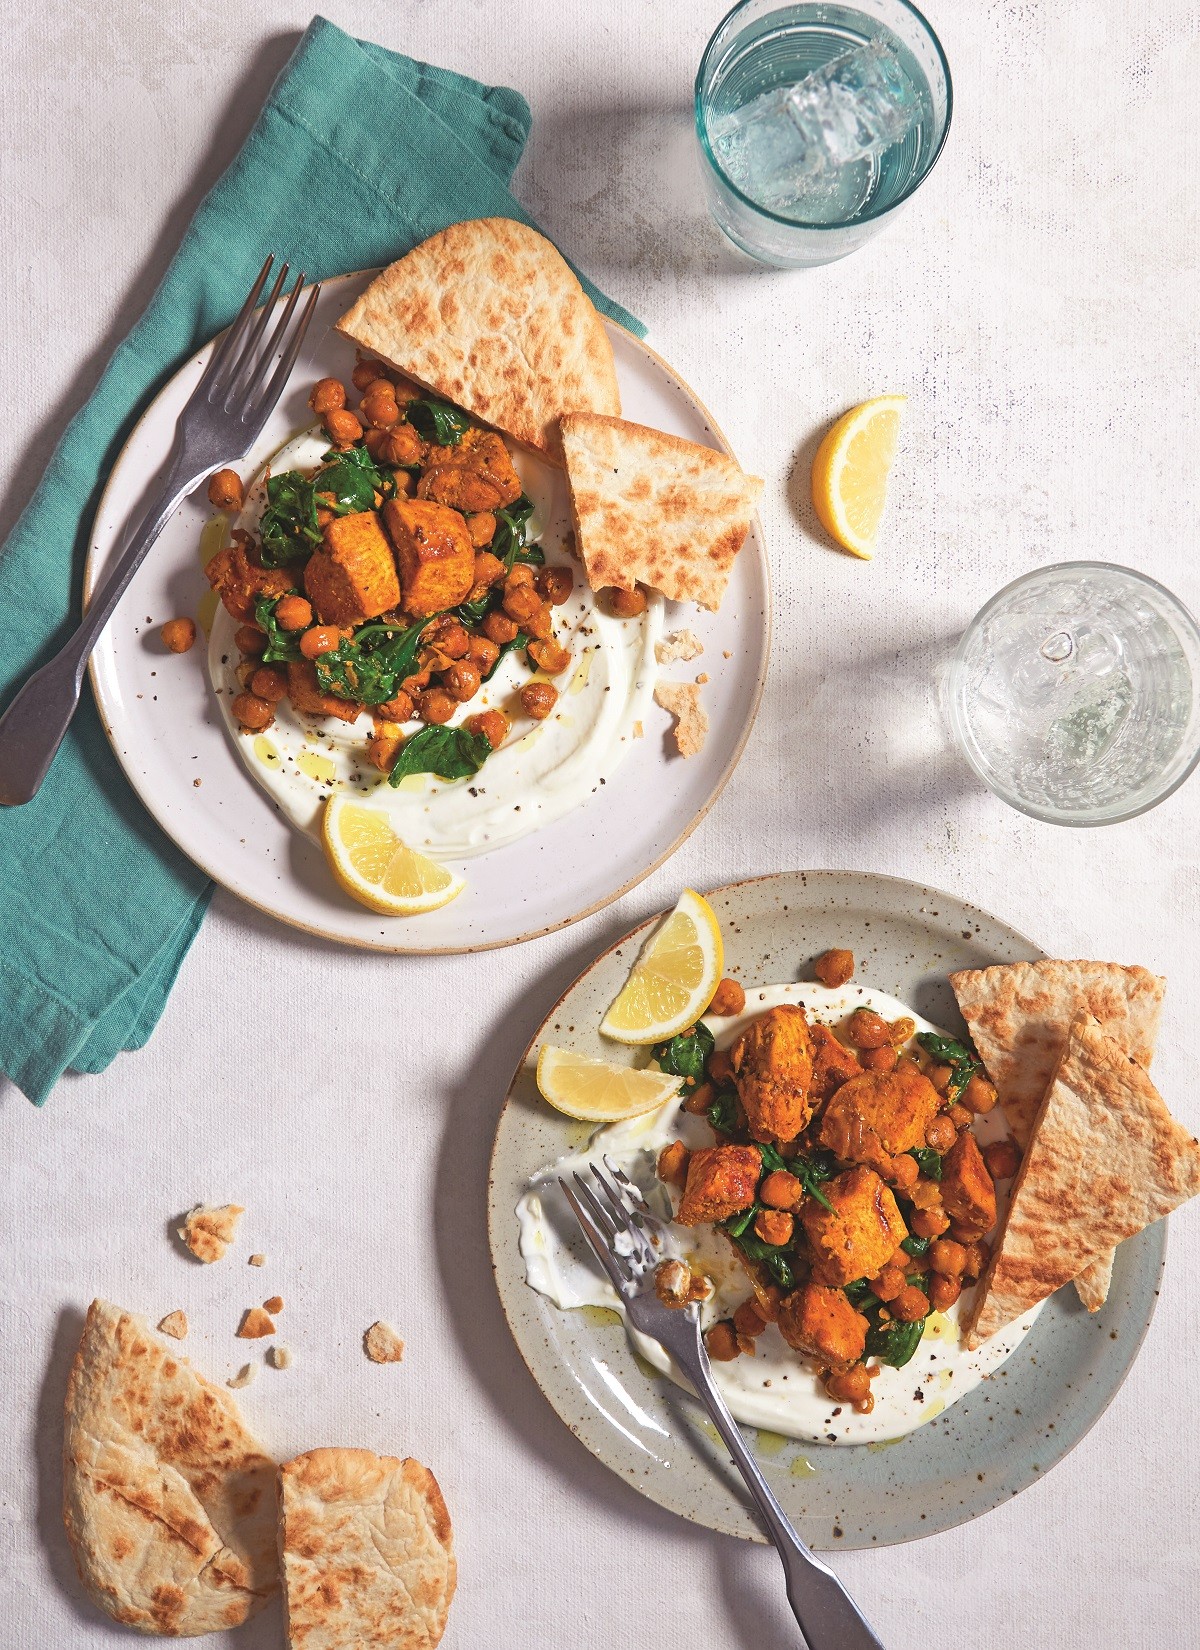 Everyday healthy, turnmeric chicken and crispy chickpeas